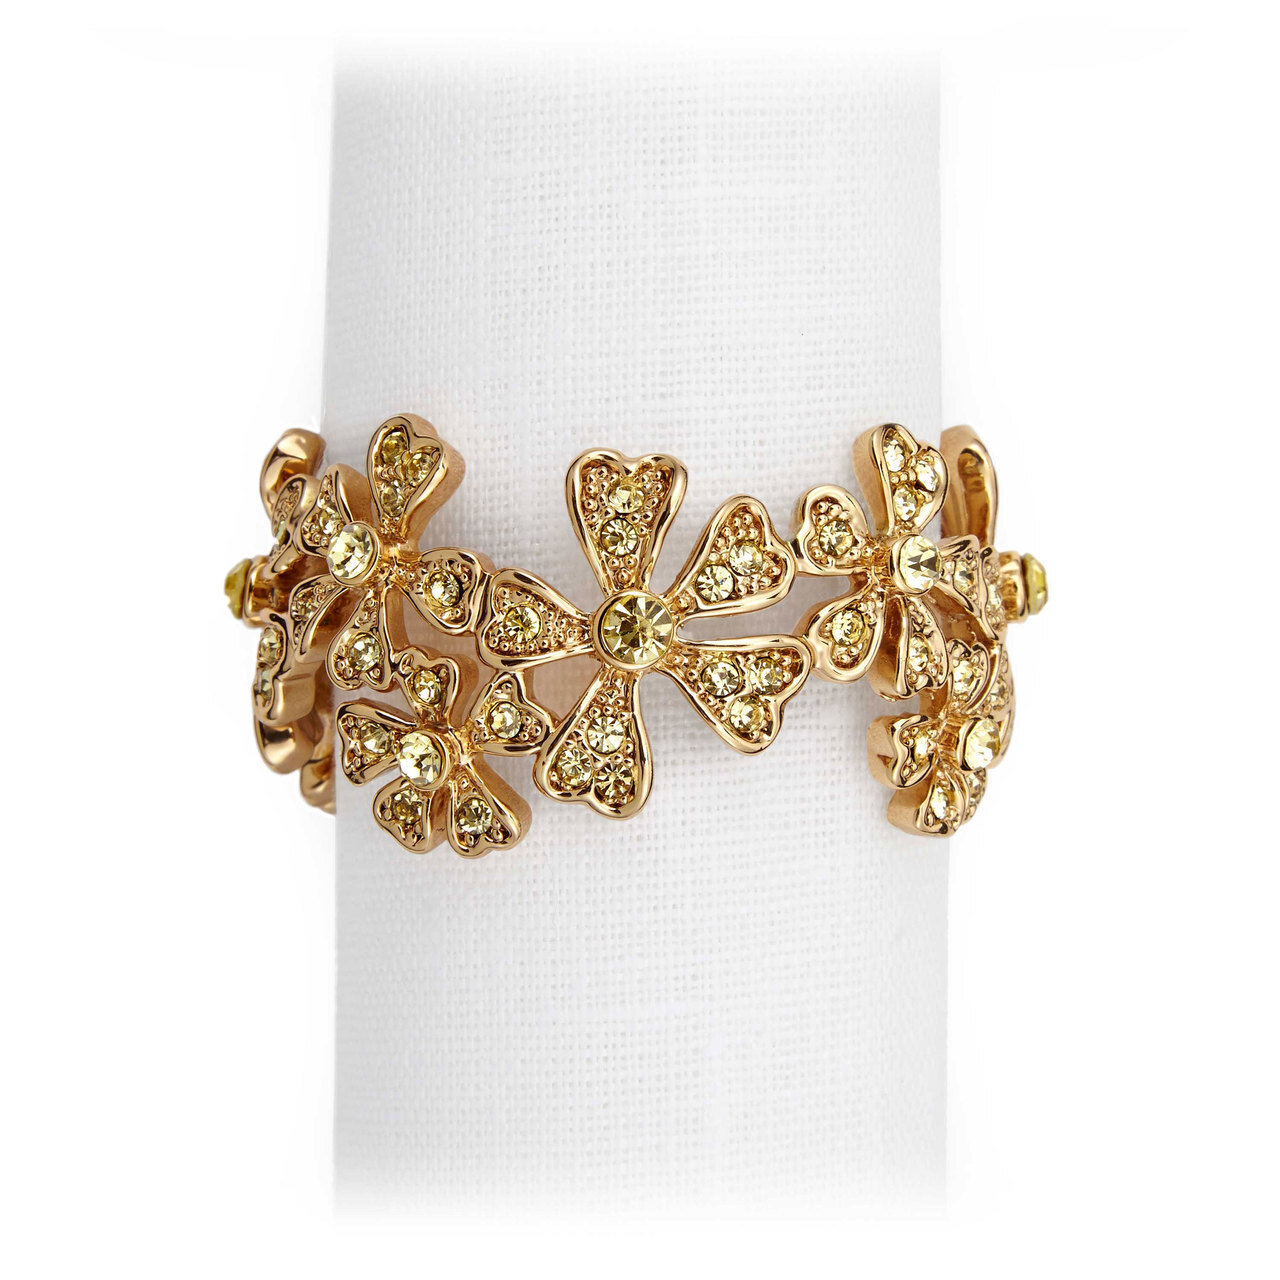 L'Objet Gold with Yellow Crystals Garland Napkin Holder